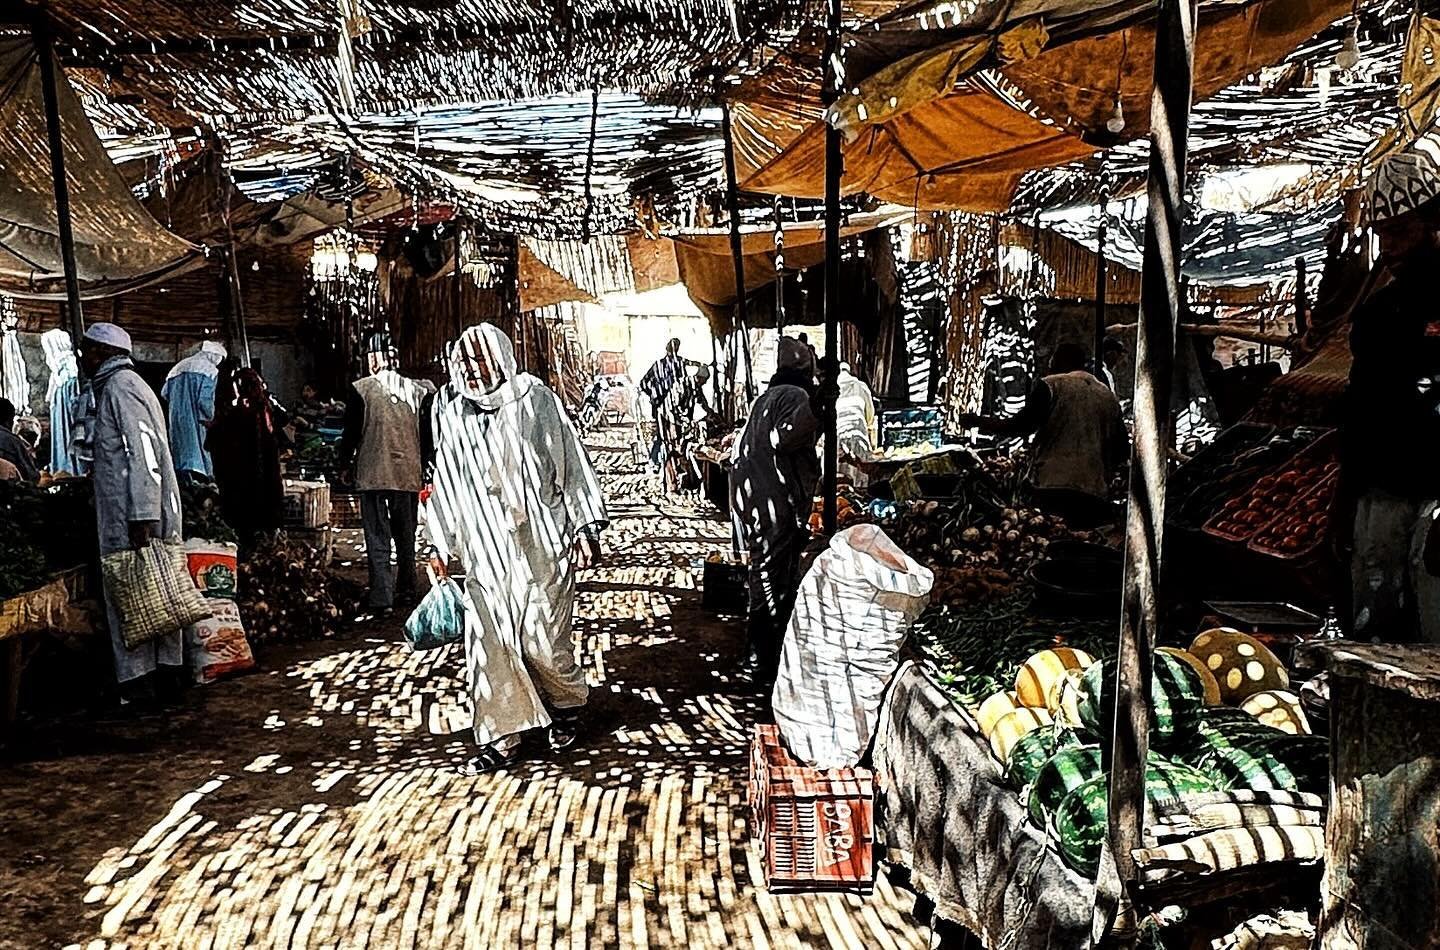 Light coming through the bamboo ceiling in a market we visited on the drive Fes. 
✨
Morocco is said to have its feet in Africa and its head in Europe. 
Meaning it's rooted in an indigenous, communal world, while always watching and influencing a Euro